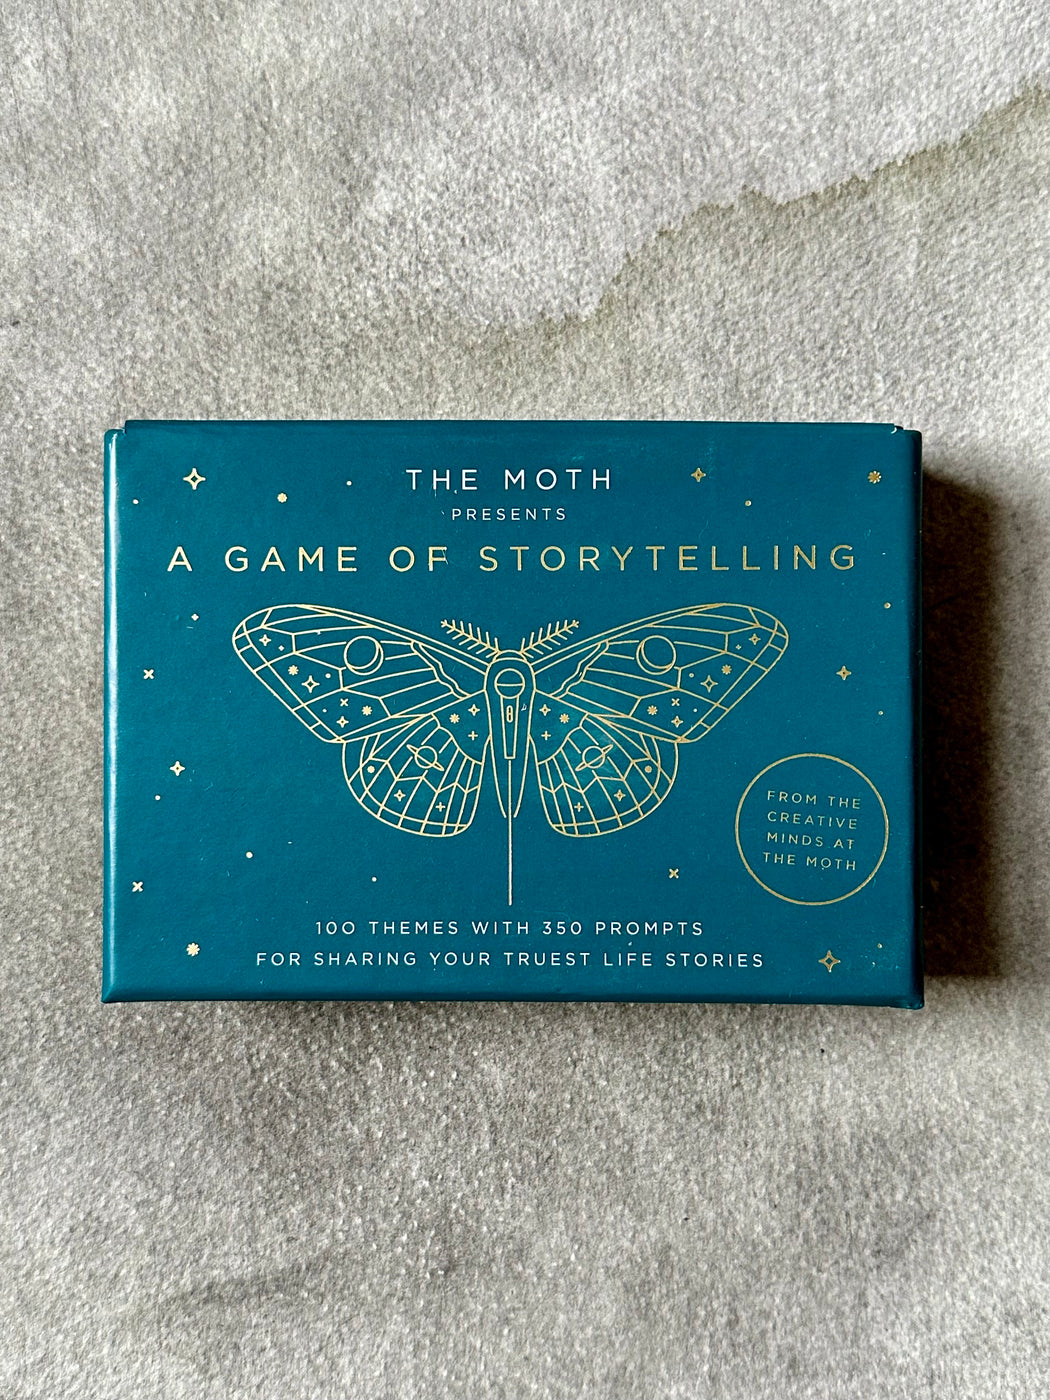 "The Moth Presents: A Game of Storytelling"